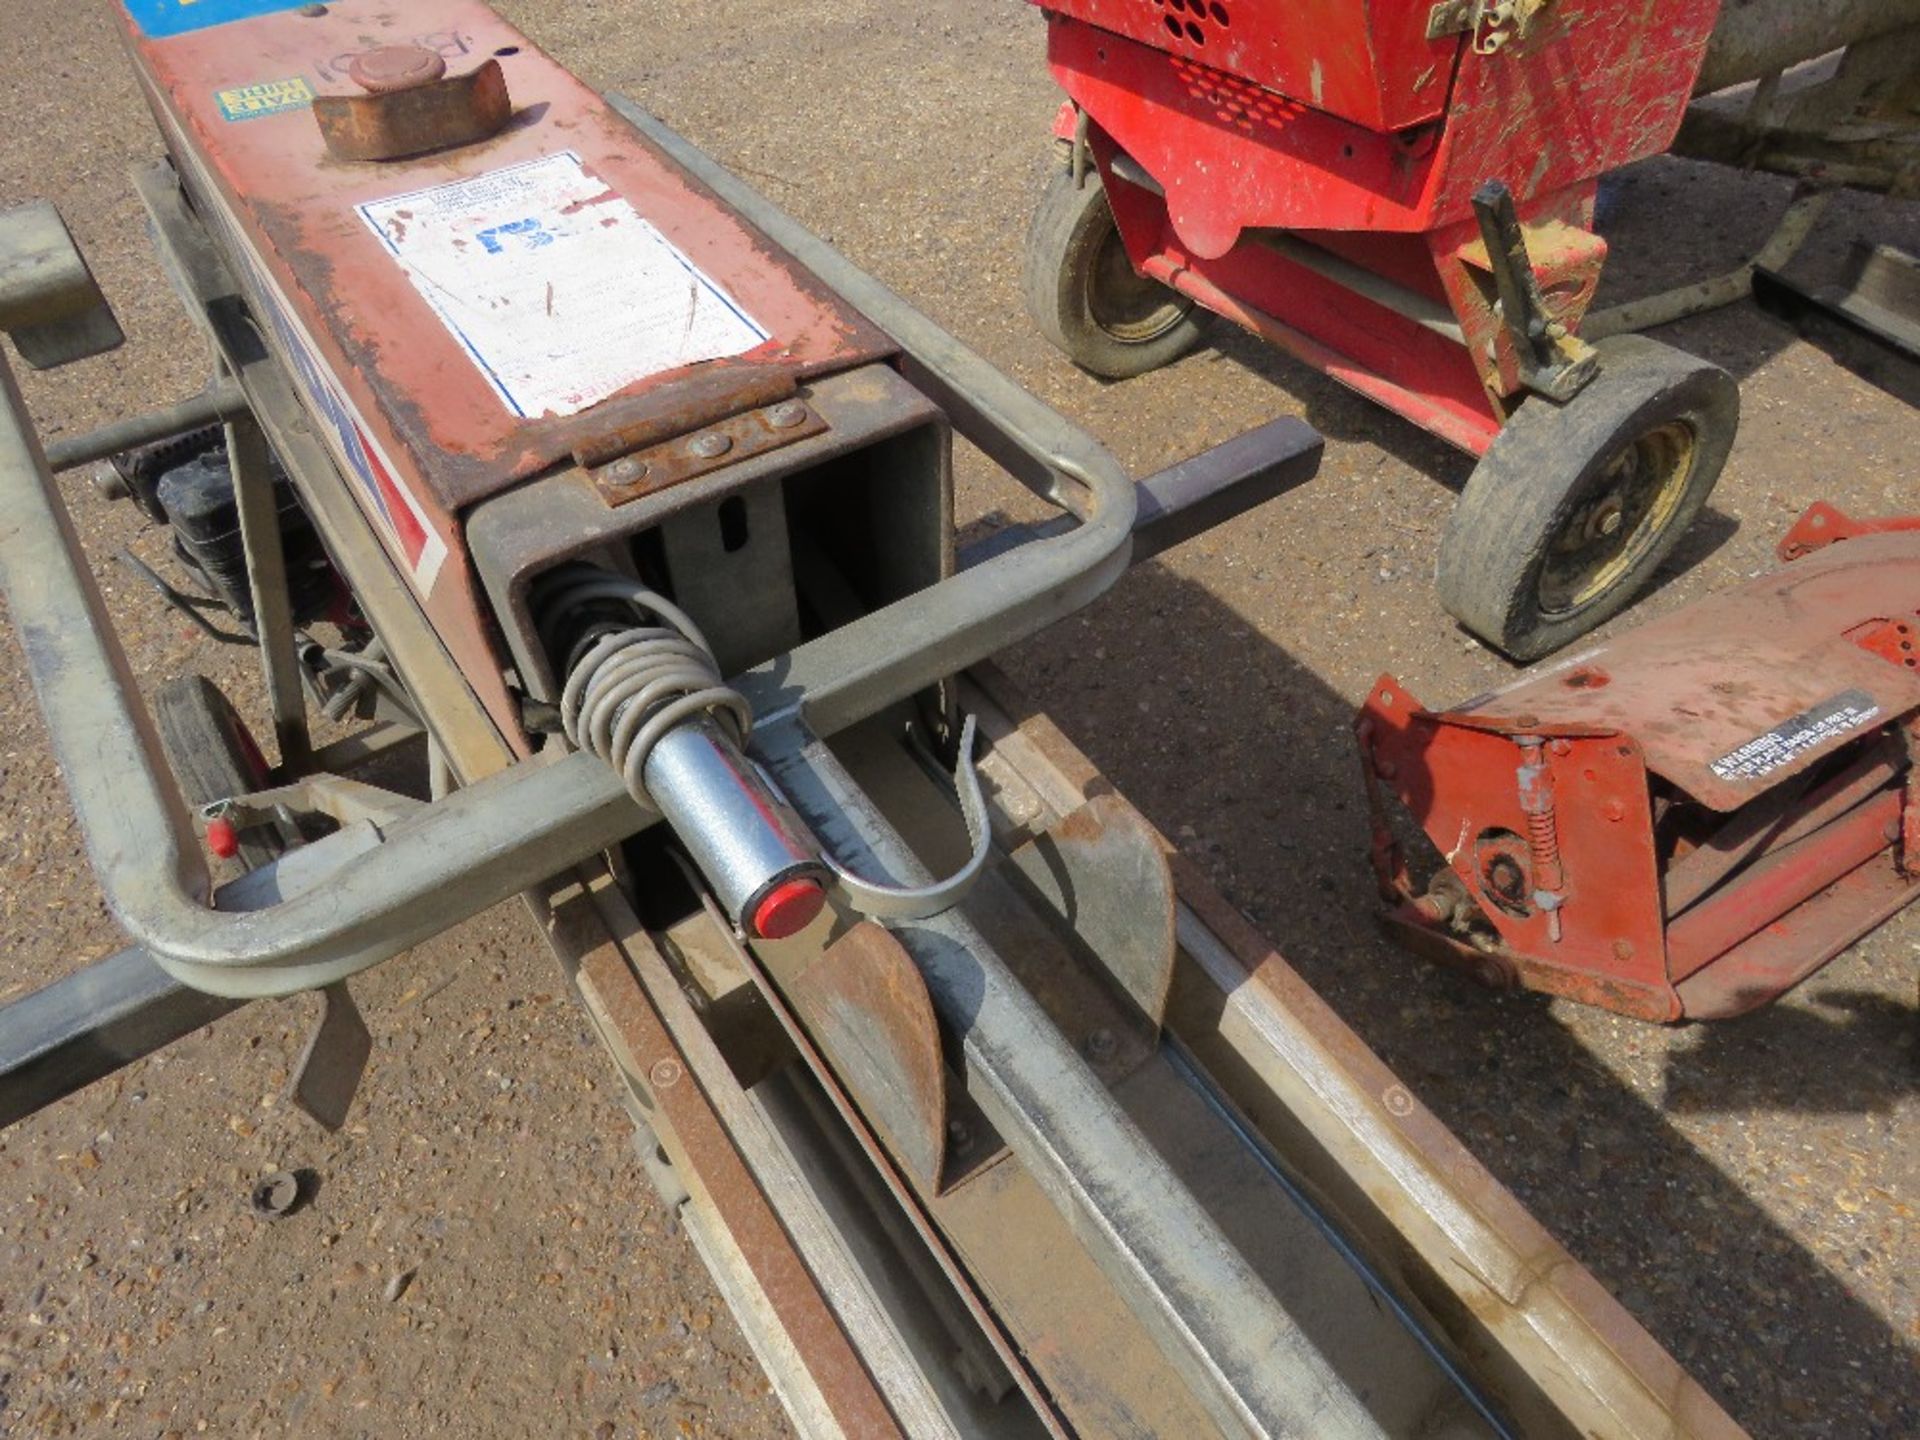 BUMPA PETROL ENGINED TILE HOIST WITH HONDA ENGINE, 32FT OVERALL LENGTH APPROX. - Image 15 of 15